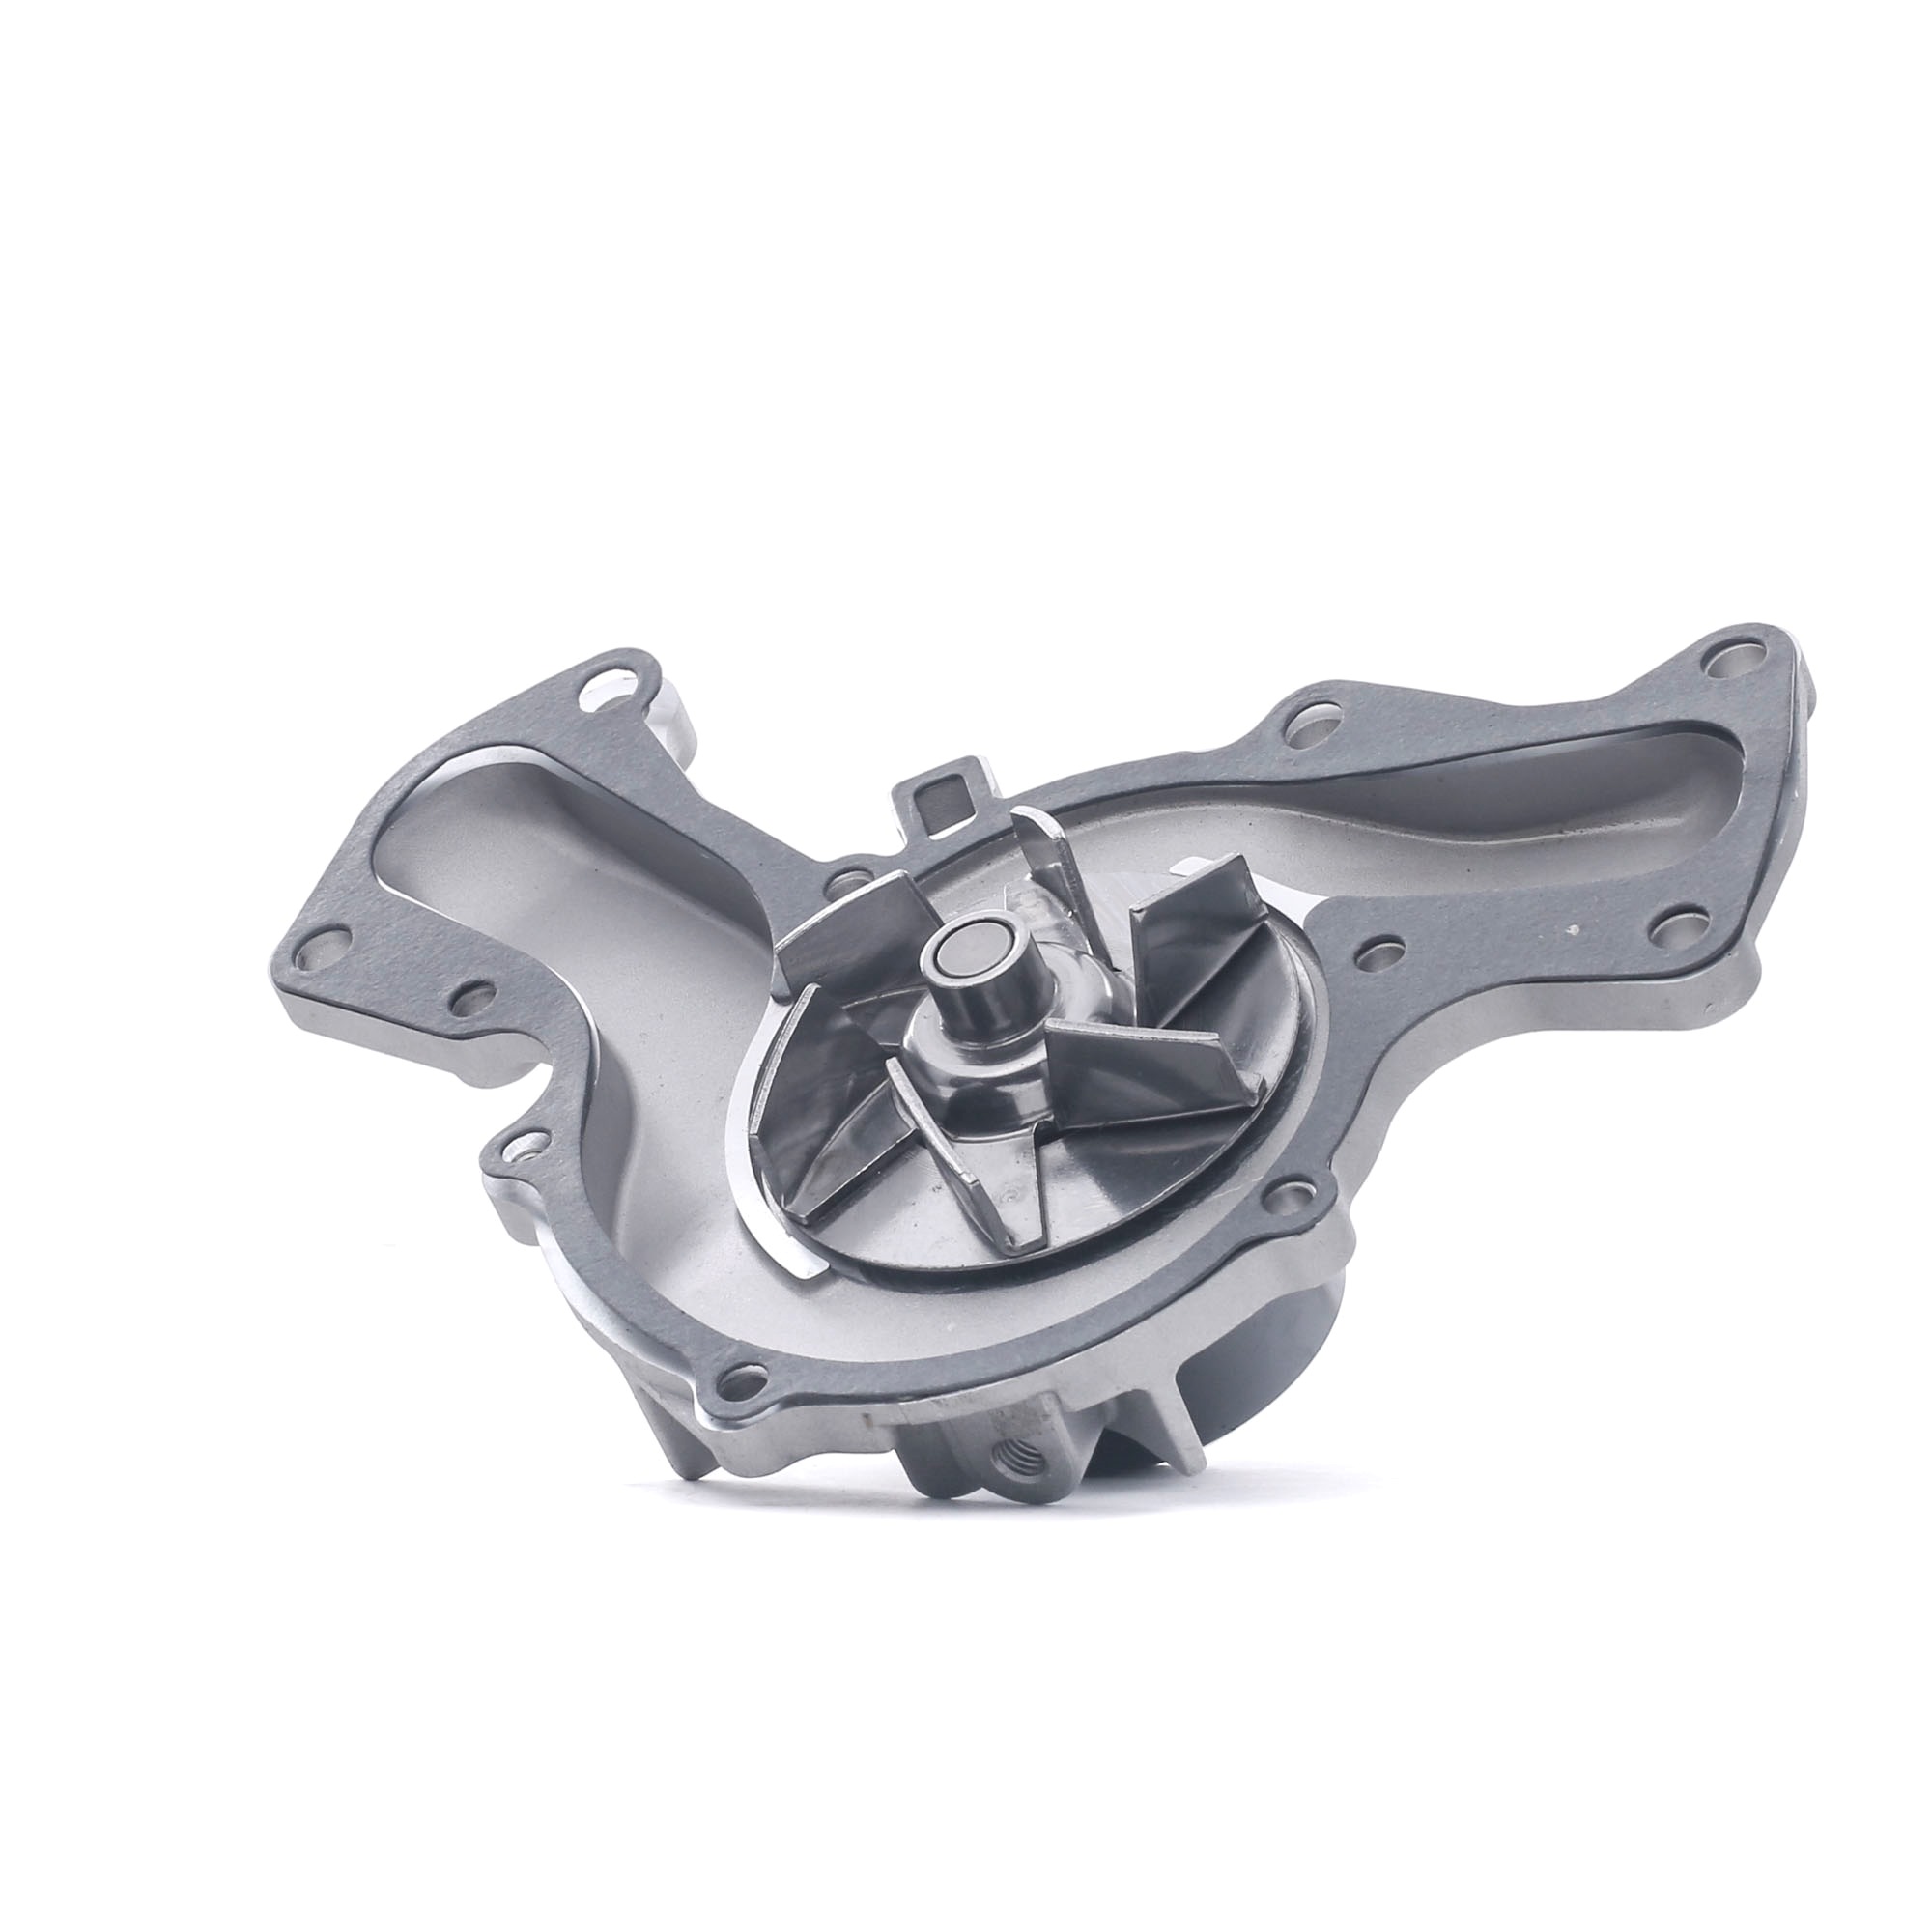 STARK SKWP-0520309 Water pump with gaskets/seals, Belt Pulley Ø: 60 mm, for timing belt drive